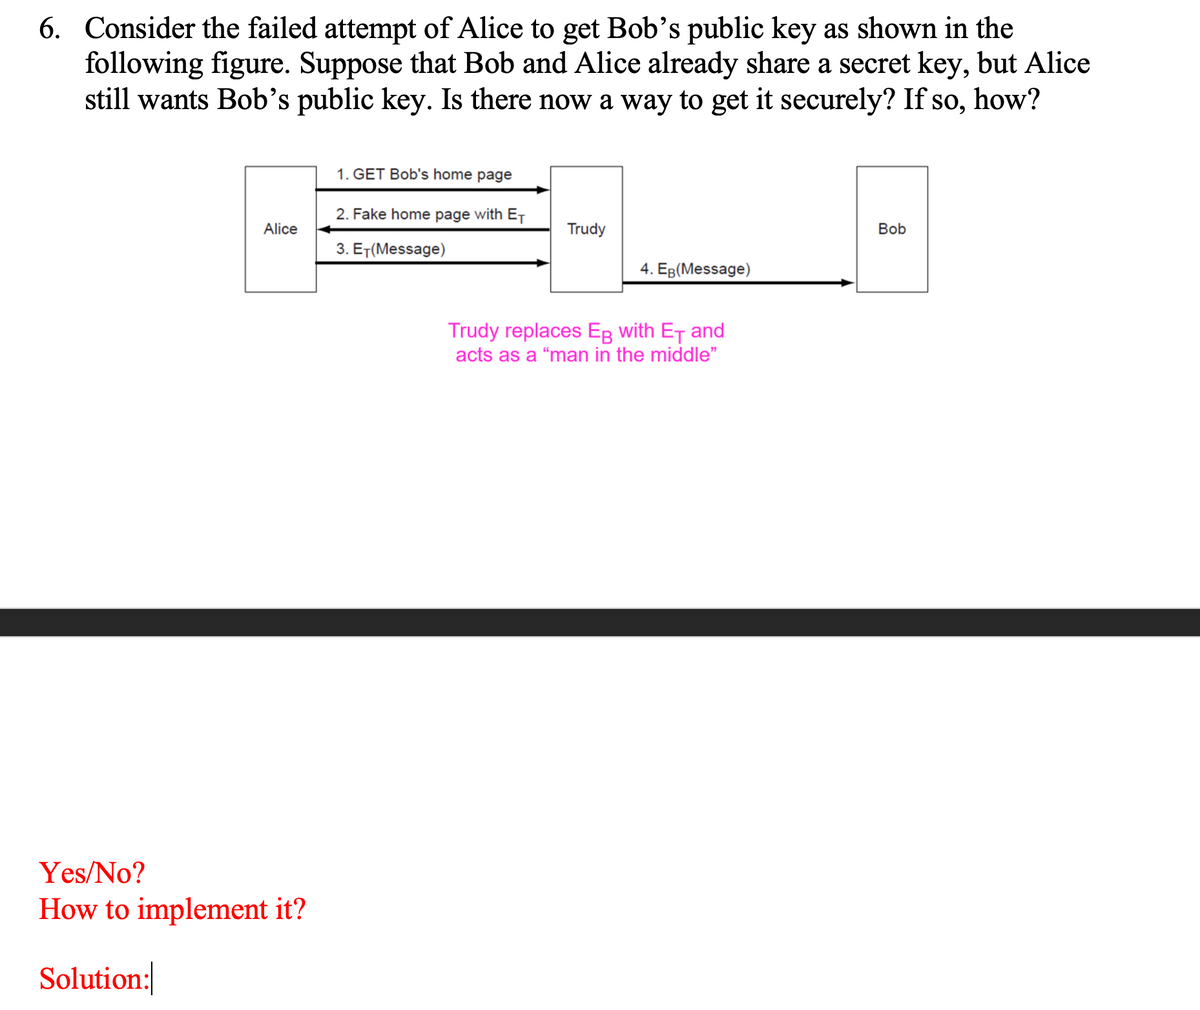 6. Consider the failed attempt of Alice to get Bob's public key as shown in the
following figure. Suppose that Bob and Alice already share a secret key, but Alice
still wants Bob's public key. Is there now a way to get it securely? If so, how?
1. GET Bob's home page
2. Fake home page with ET
Alice
Trudy
Bob
3. ET(Message)
4. Ев (Мessage)
Trudy replaces EB with ET and
acts as a "man in the middle"
Yes/No?
How to implement it?
Solution:
